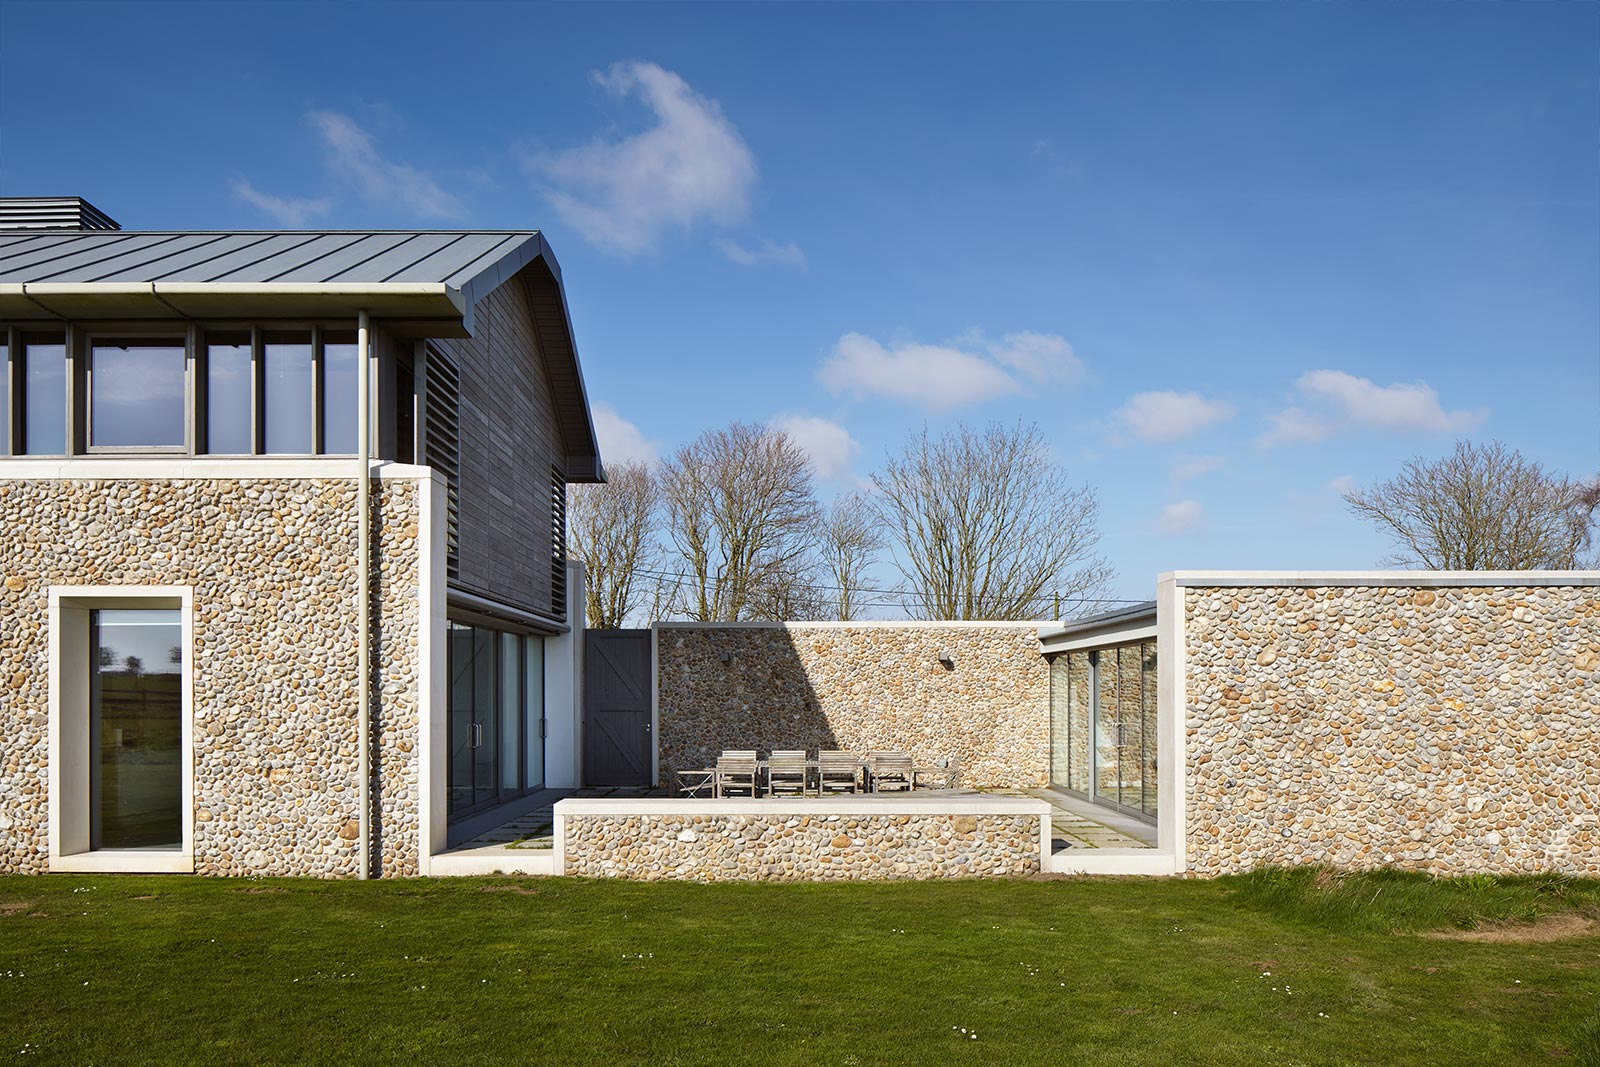 Give the gift of travel AND great design with a stay at a LIVING ARCHITECTURE holiday home. Founded in 2006, the U.K. company provides design enthusiasts with the chance to experience exceptional architecture and design by renting truly inspiring homes, like Long House pictured here. With rentals scattered across England, you’ll be spoiled for choice. This just might be a gift you have to give yourself.